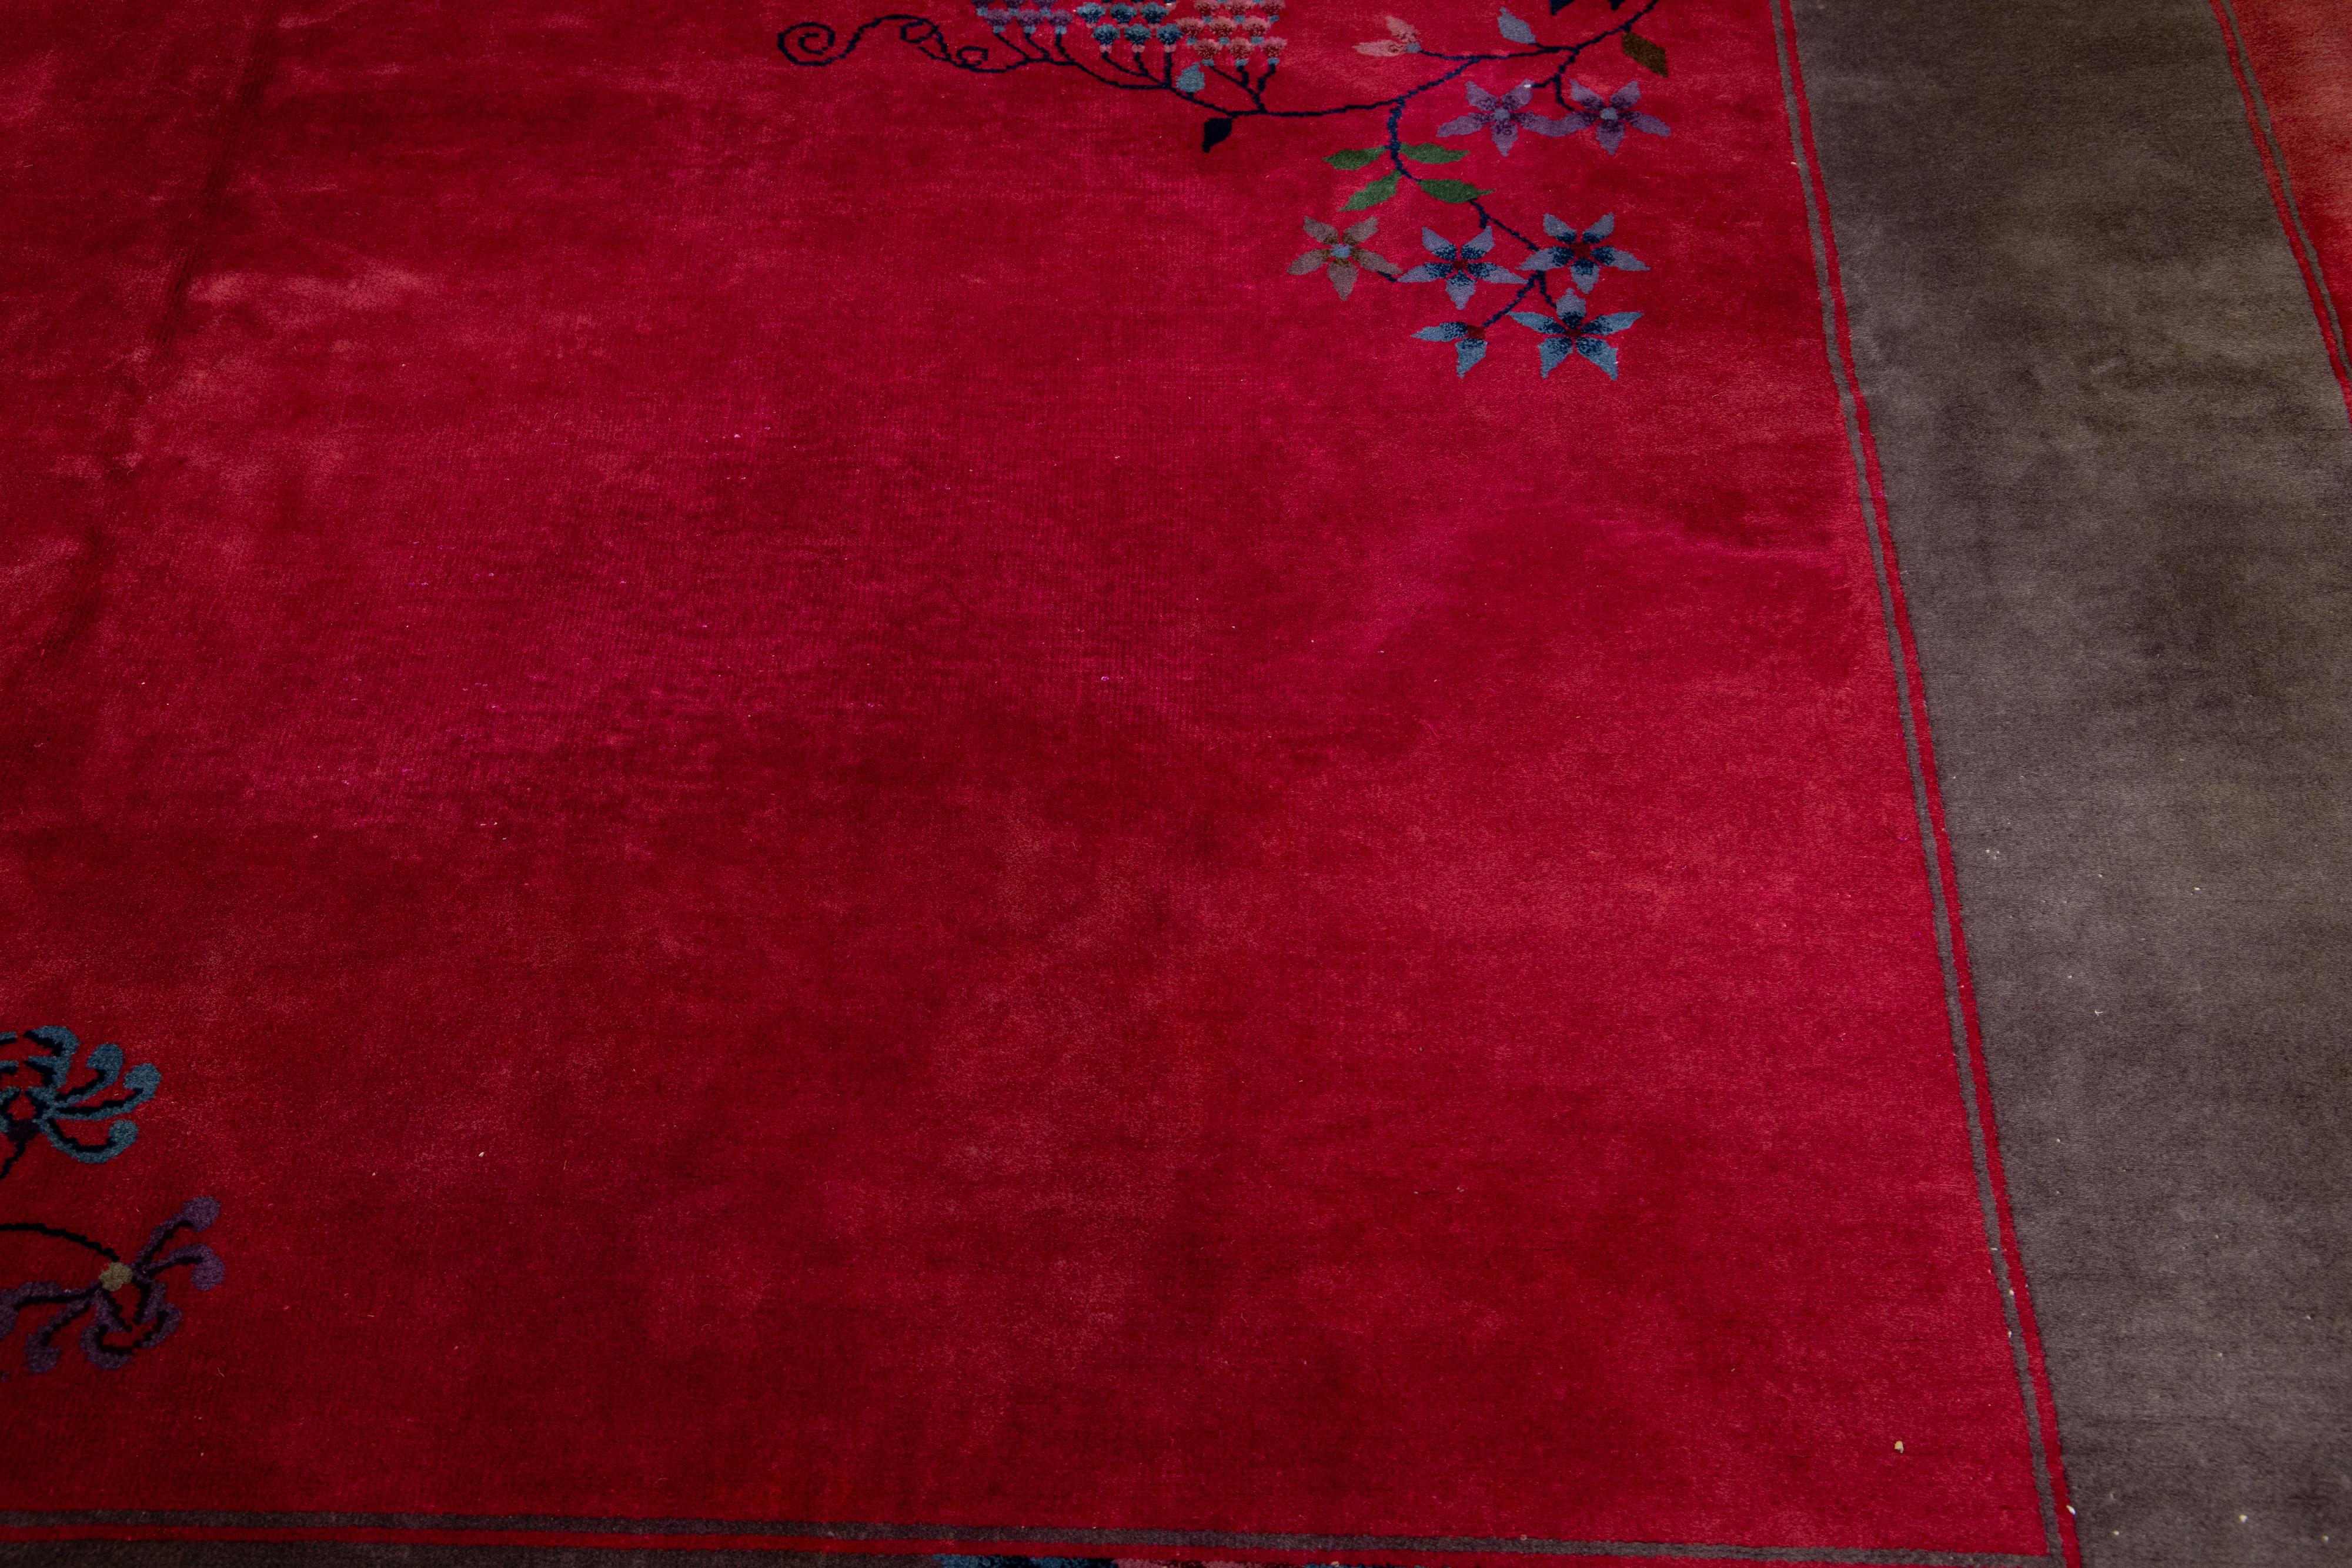 Red Art Deco Chinese Wool Rug with Floral Motif From the 1920s For Sale 8